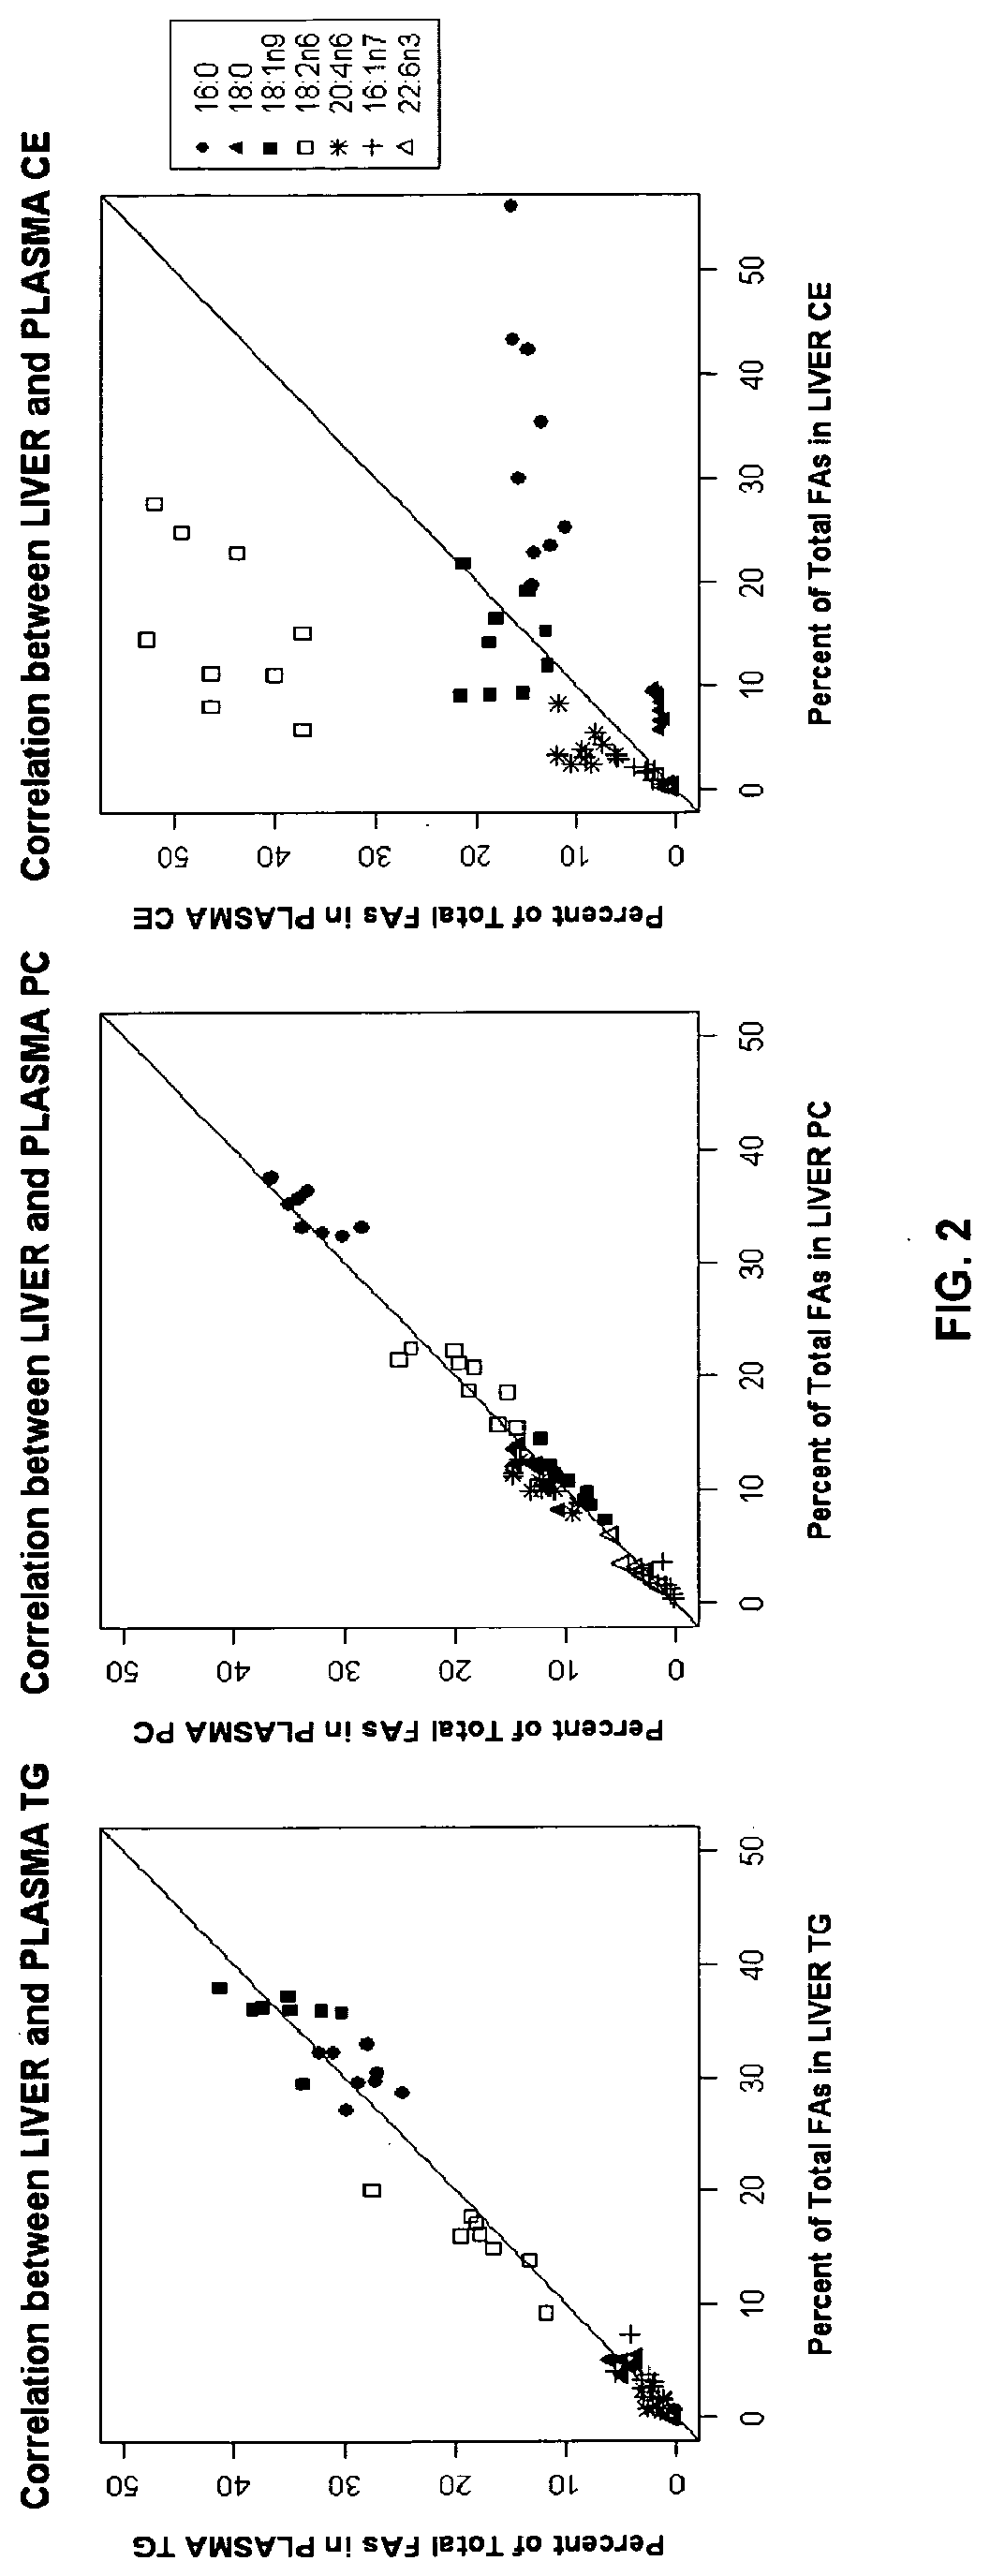 Method of Assessing Liver Triglyceride Levels Using a Body Fluid Sample